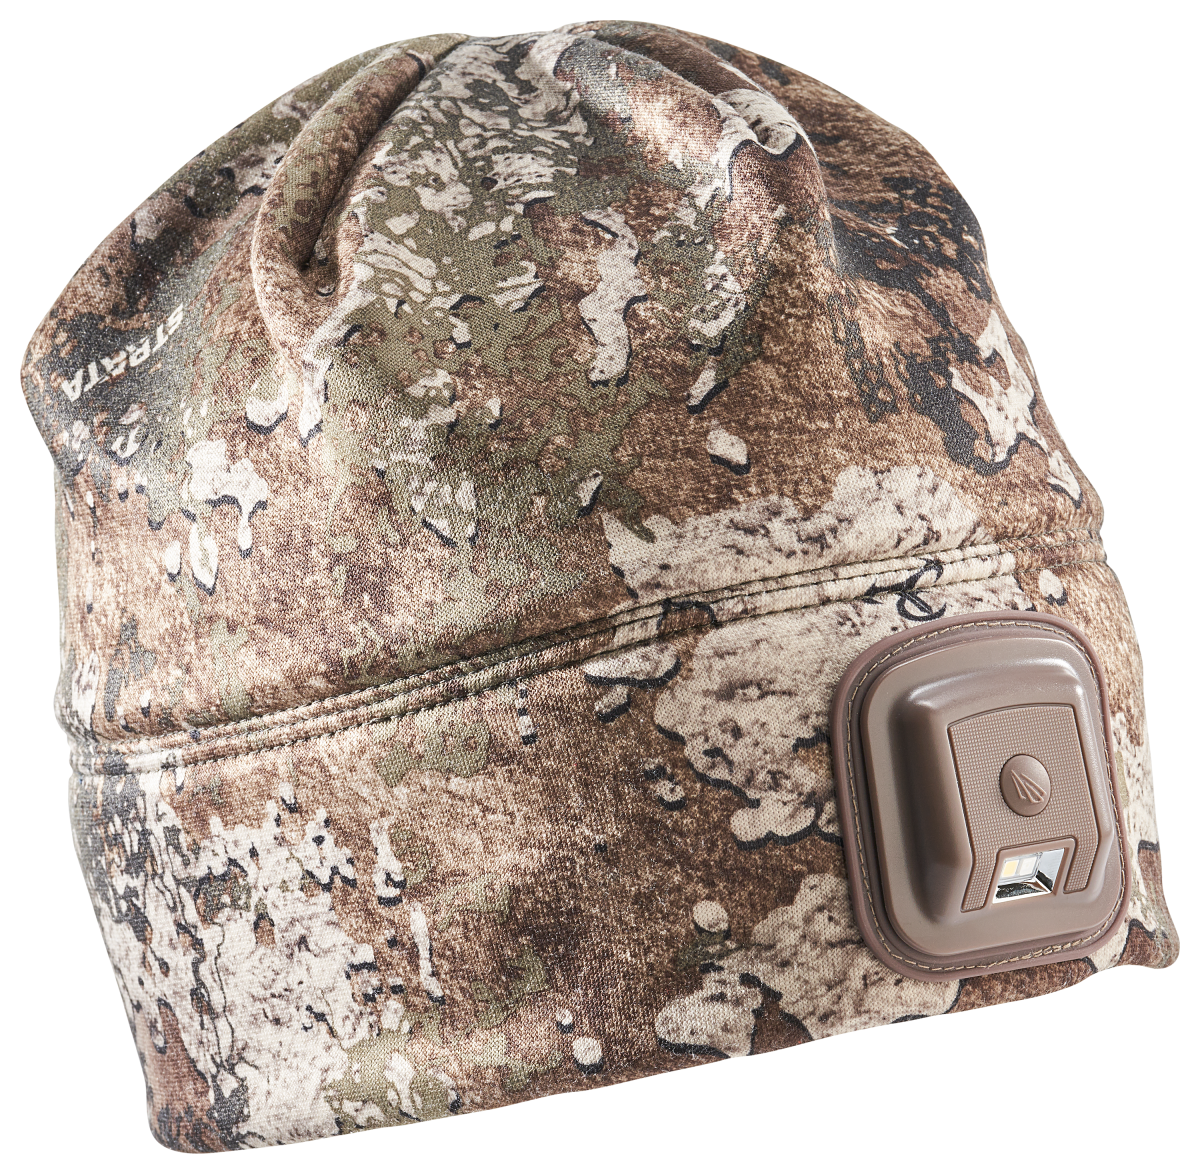 Cabela's Headlamp in a Hat 3.5 Rechargeable Lighted Beanie - TrueTimber Strata